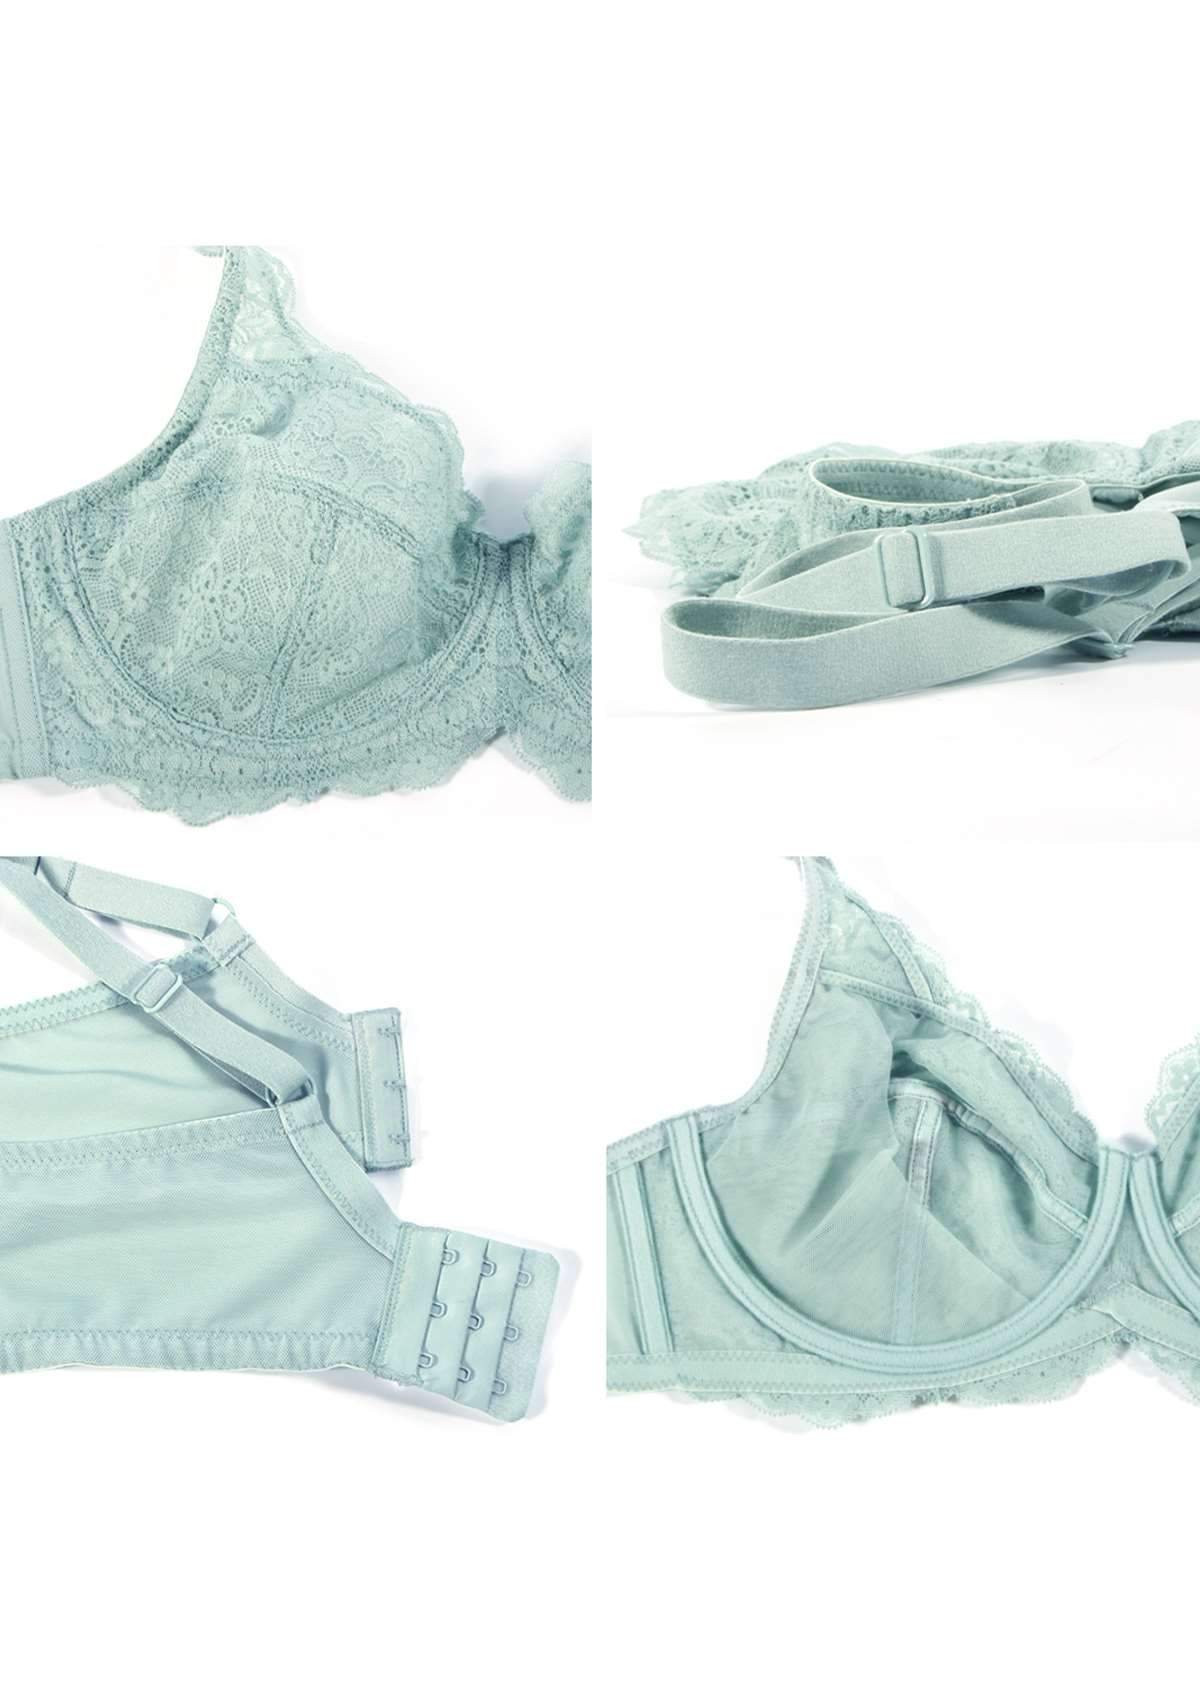 HSIA All-Over Floral Lace: Best Bra For Elderly With Sagging Breasts - Crystal Blue / 40 / DDD/F